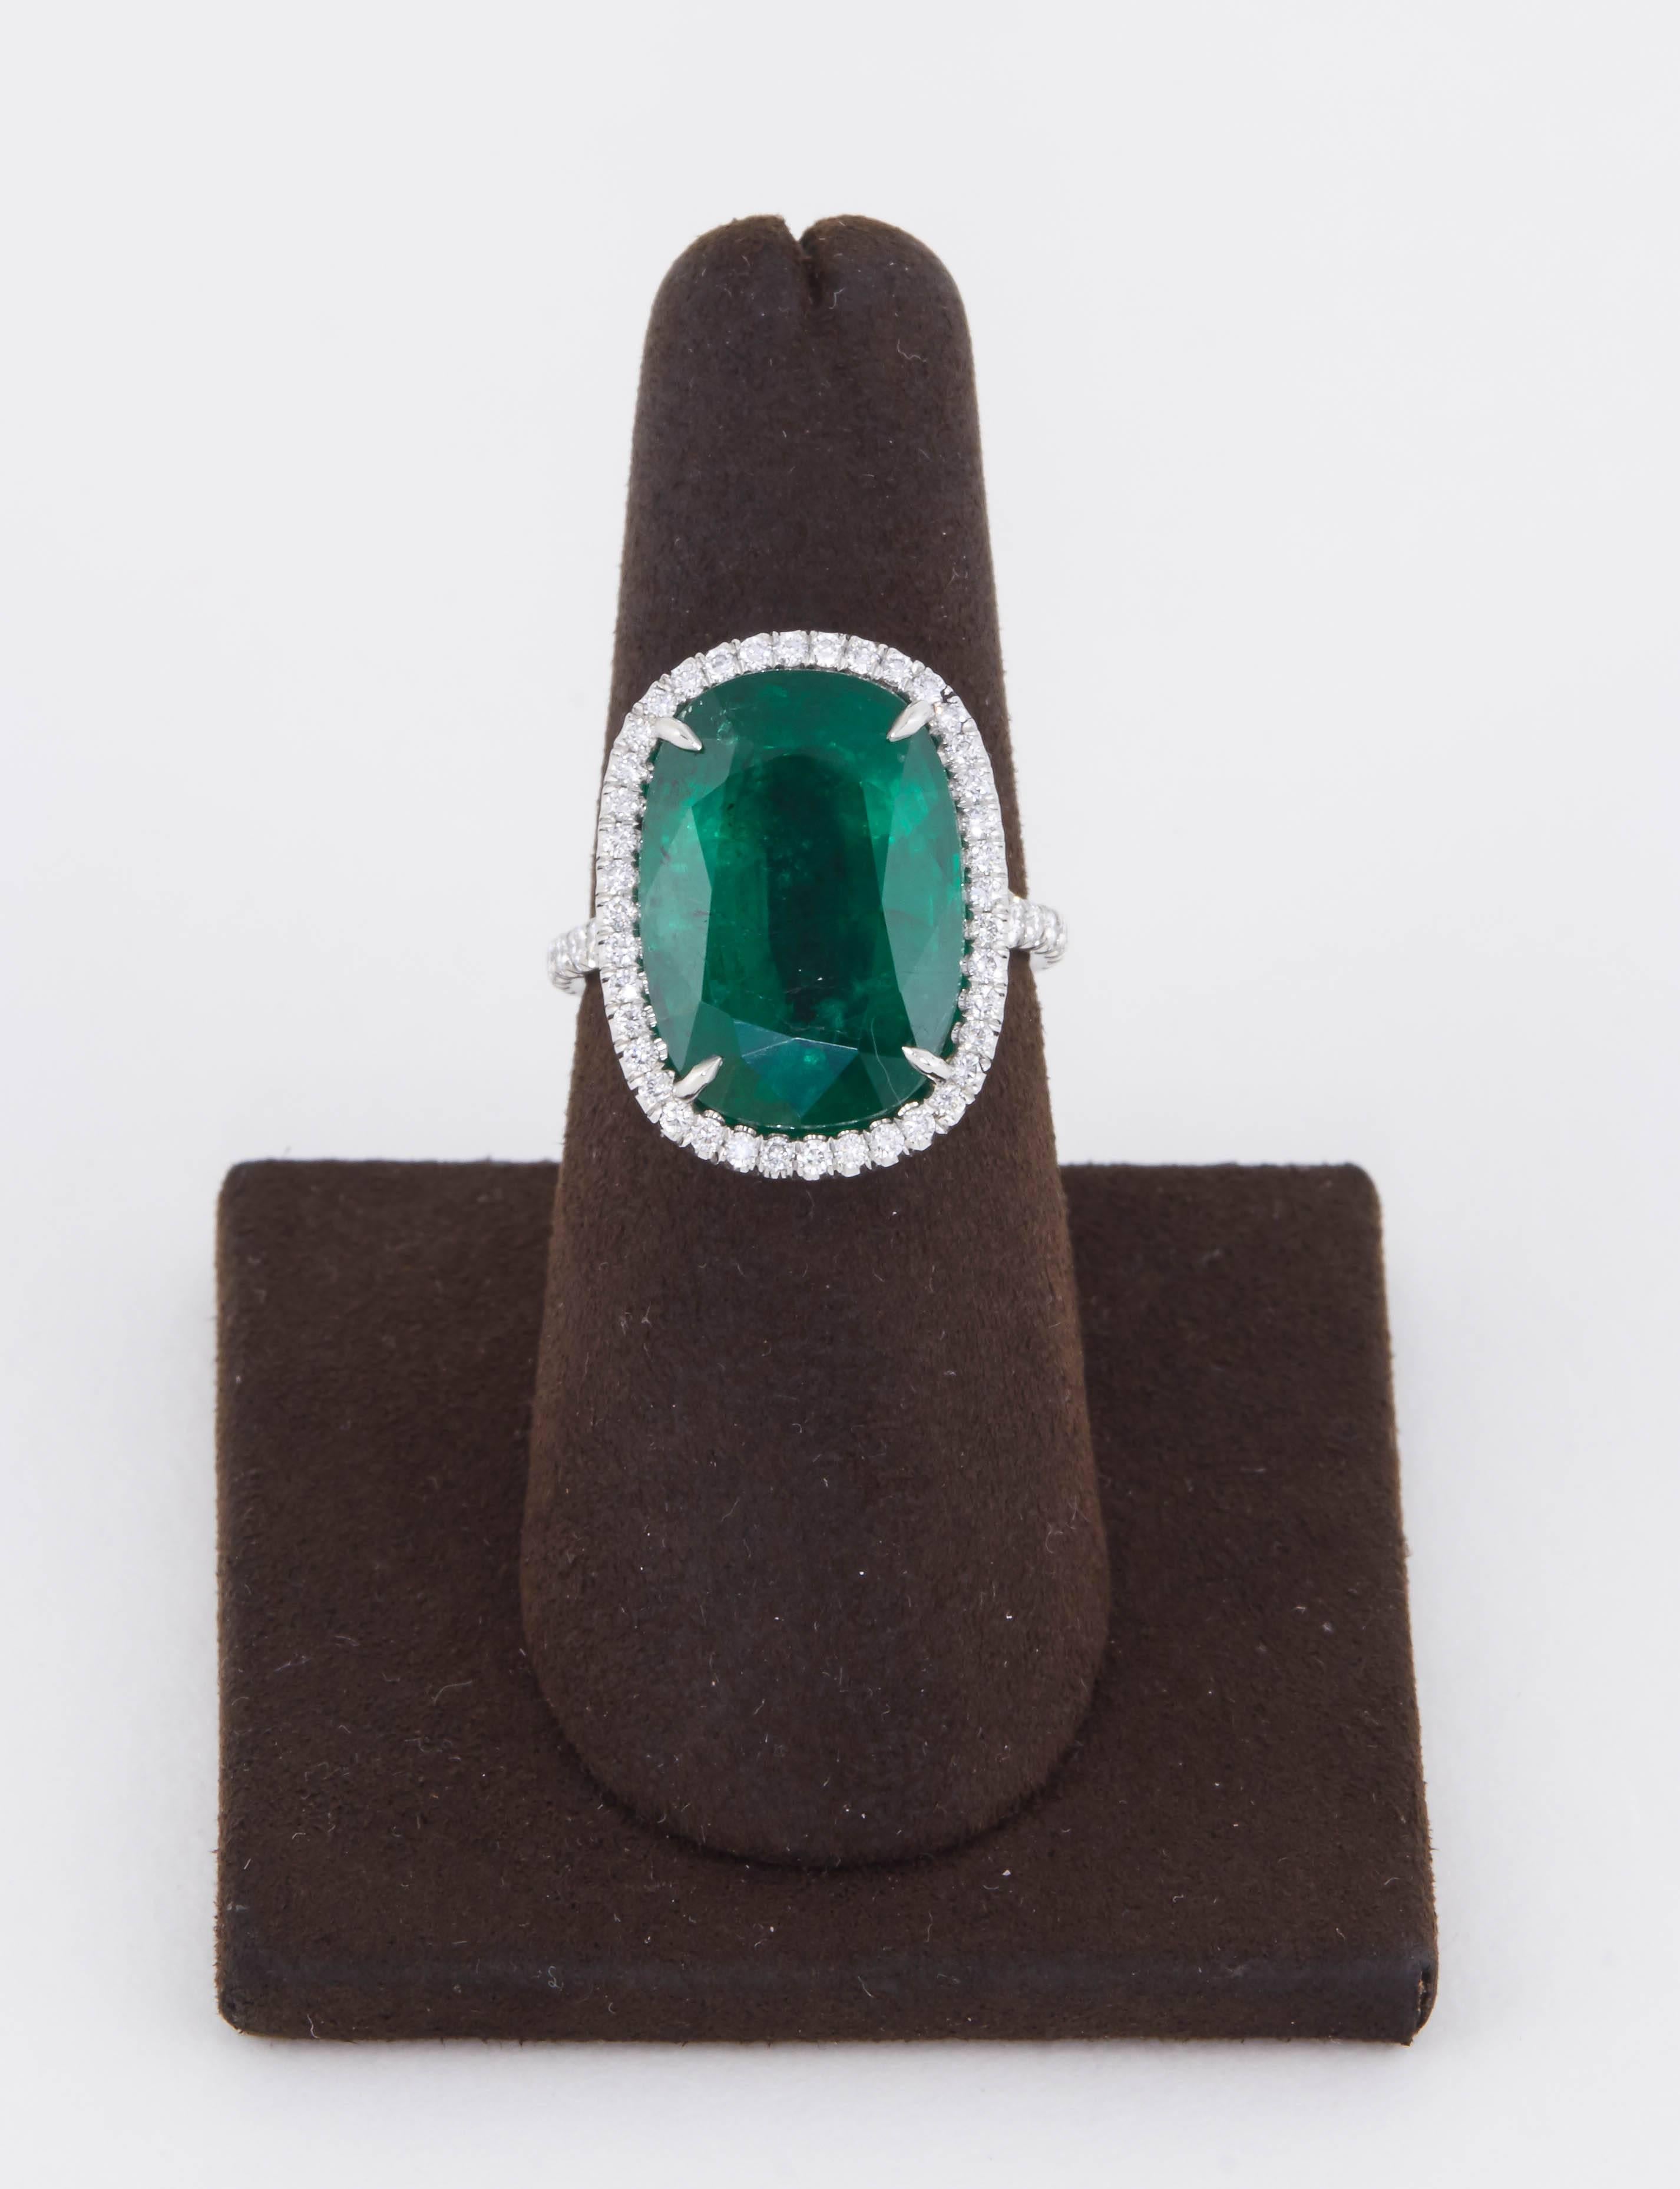 
An AMAZING Emerald Ring!!

11.86 carat cushion cut green emerald with vibrant color set in a custom made diamond mounting featuring 1.01 carats of round brilliant cut diamonds. 

This ring is currently a size 6 but can easily be resized to any